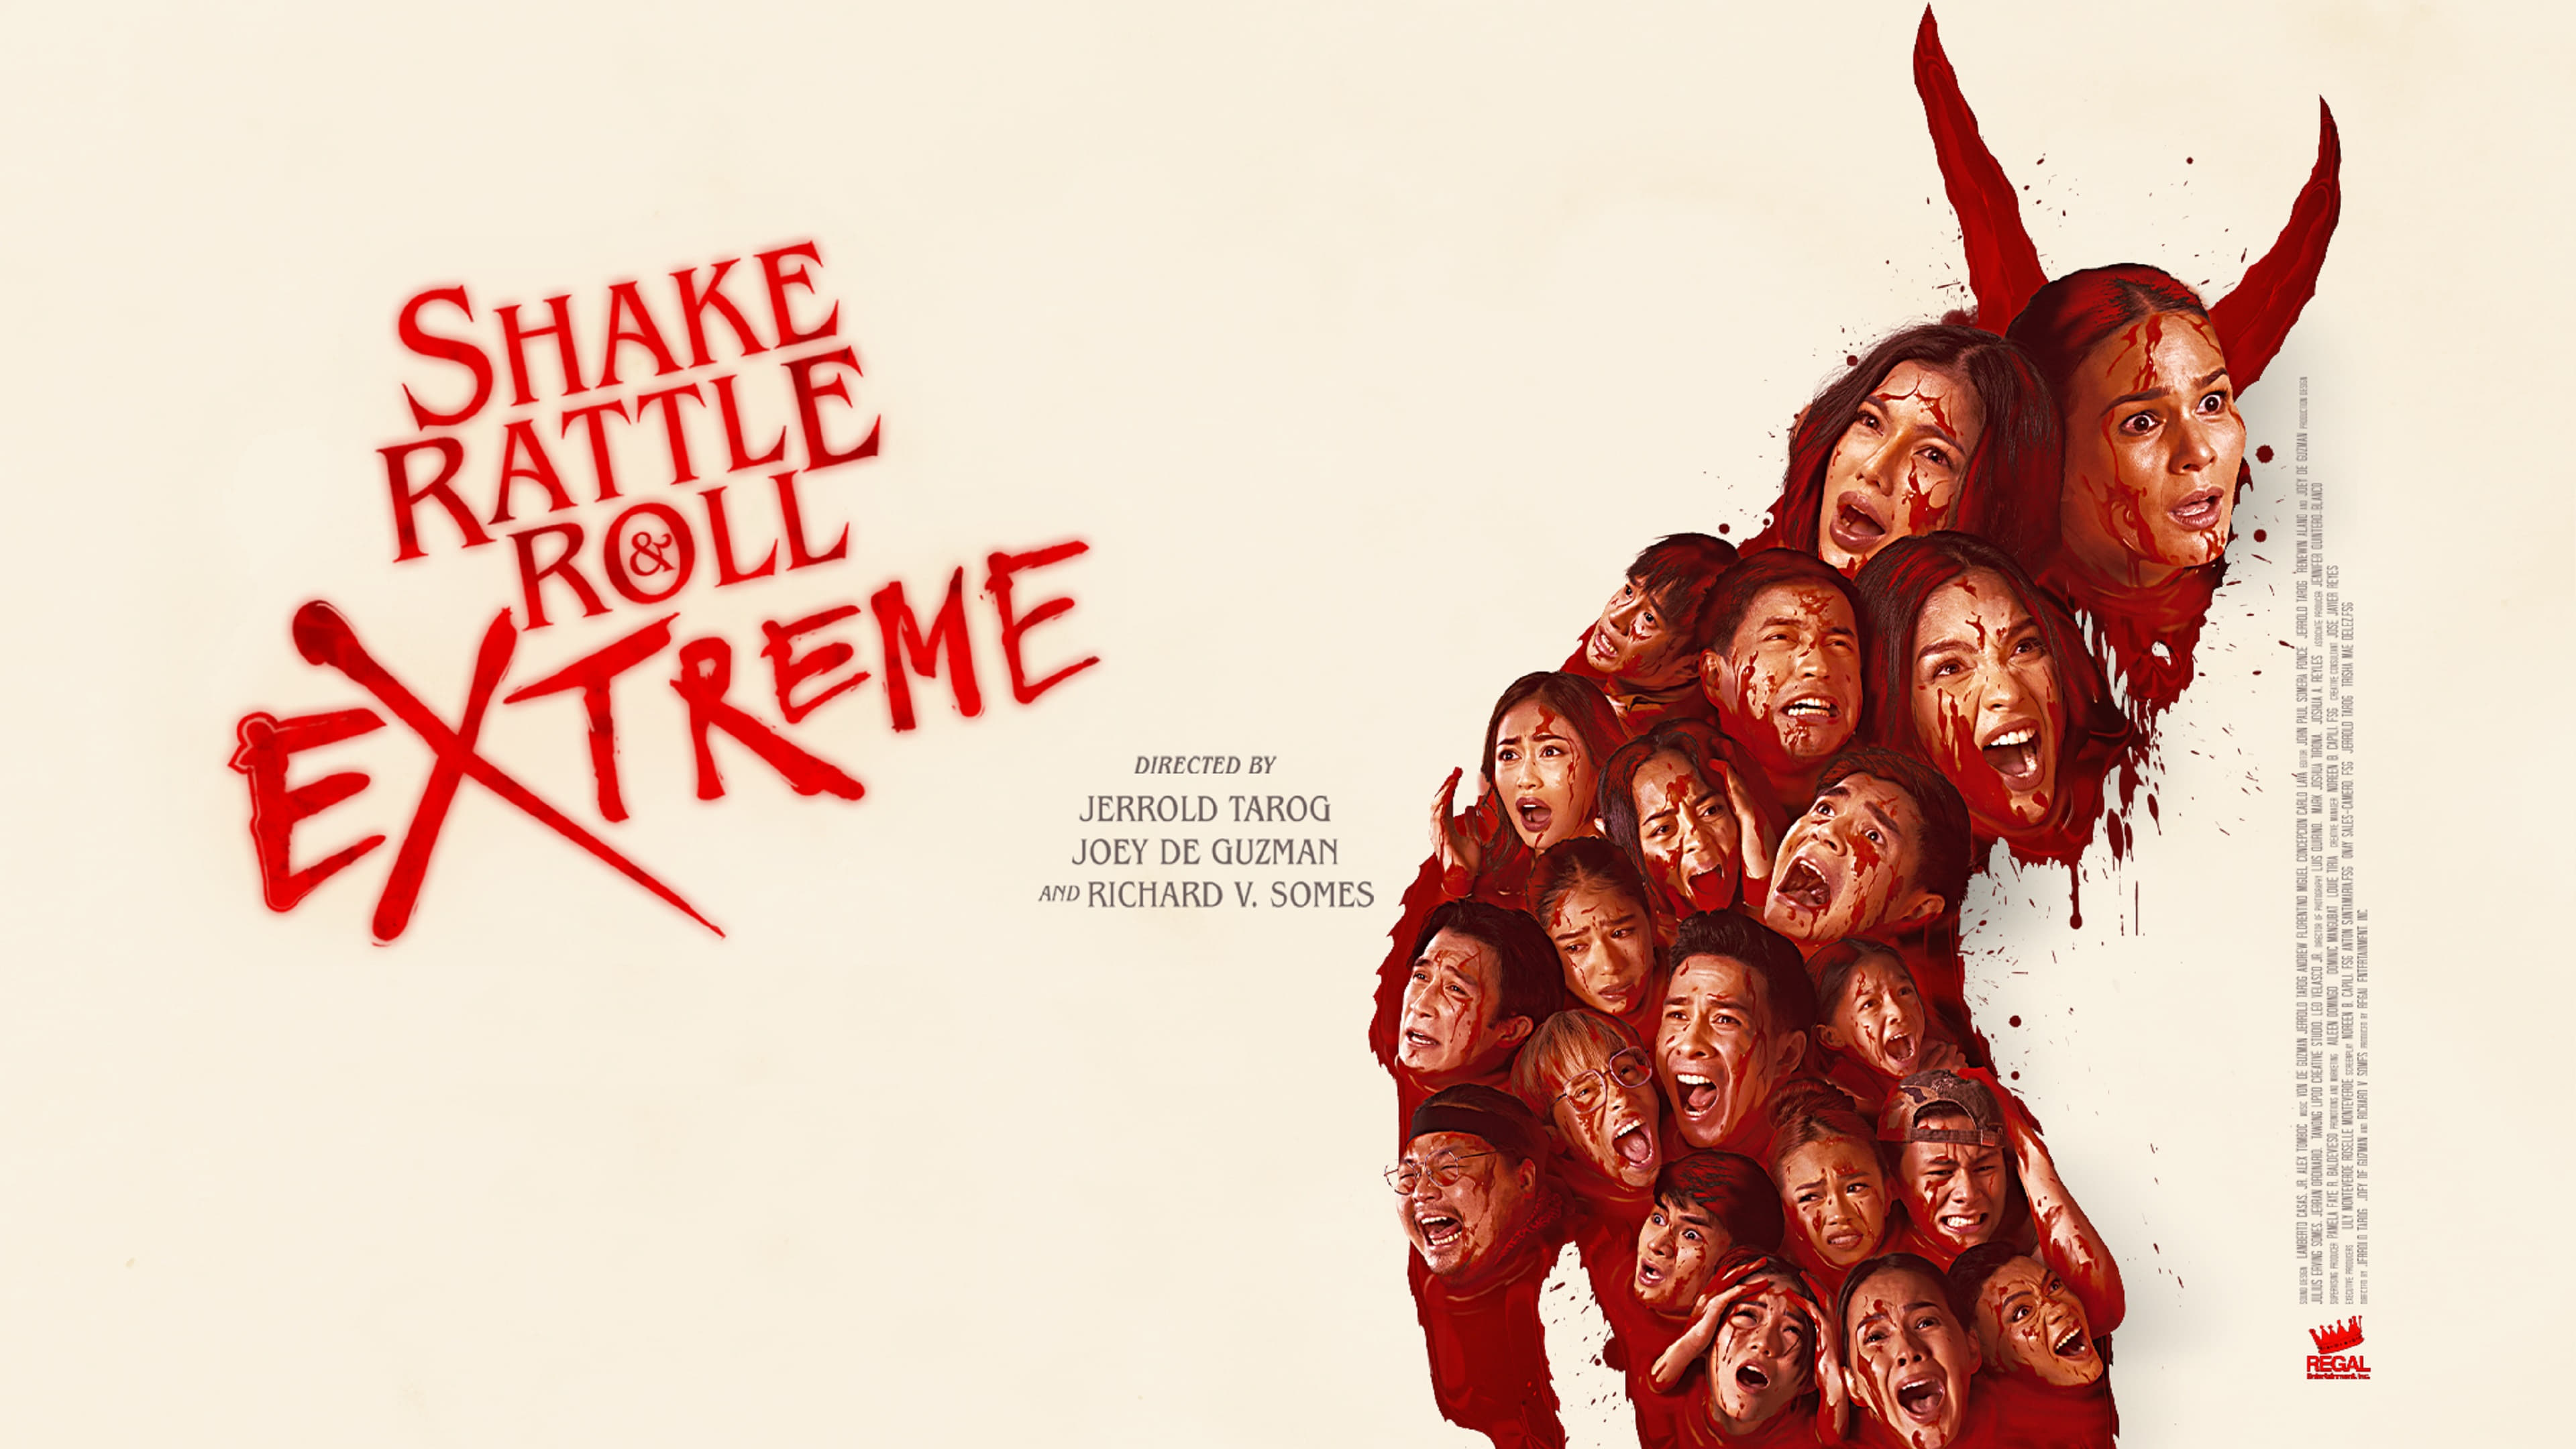 Shake, Rattle And Roll Extreme - Shake, Rattle & Roll Extreme